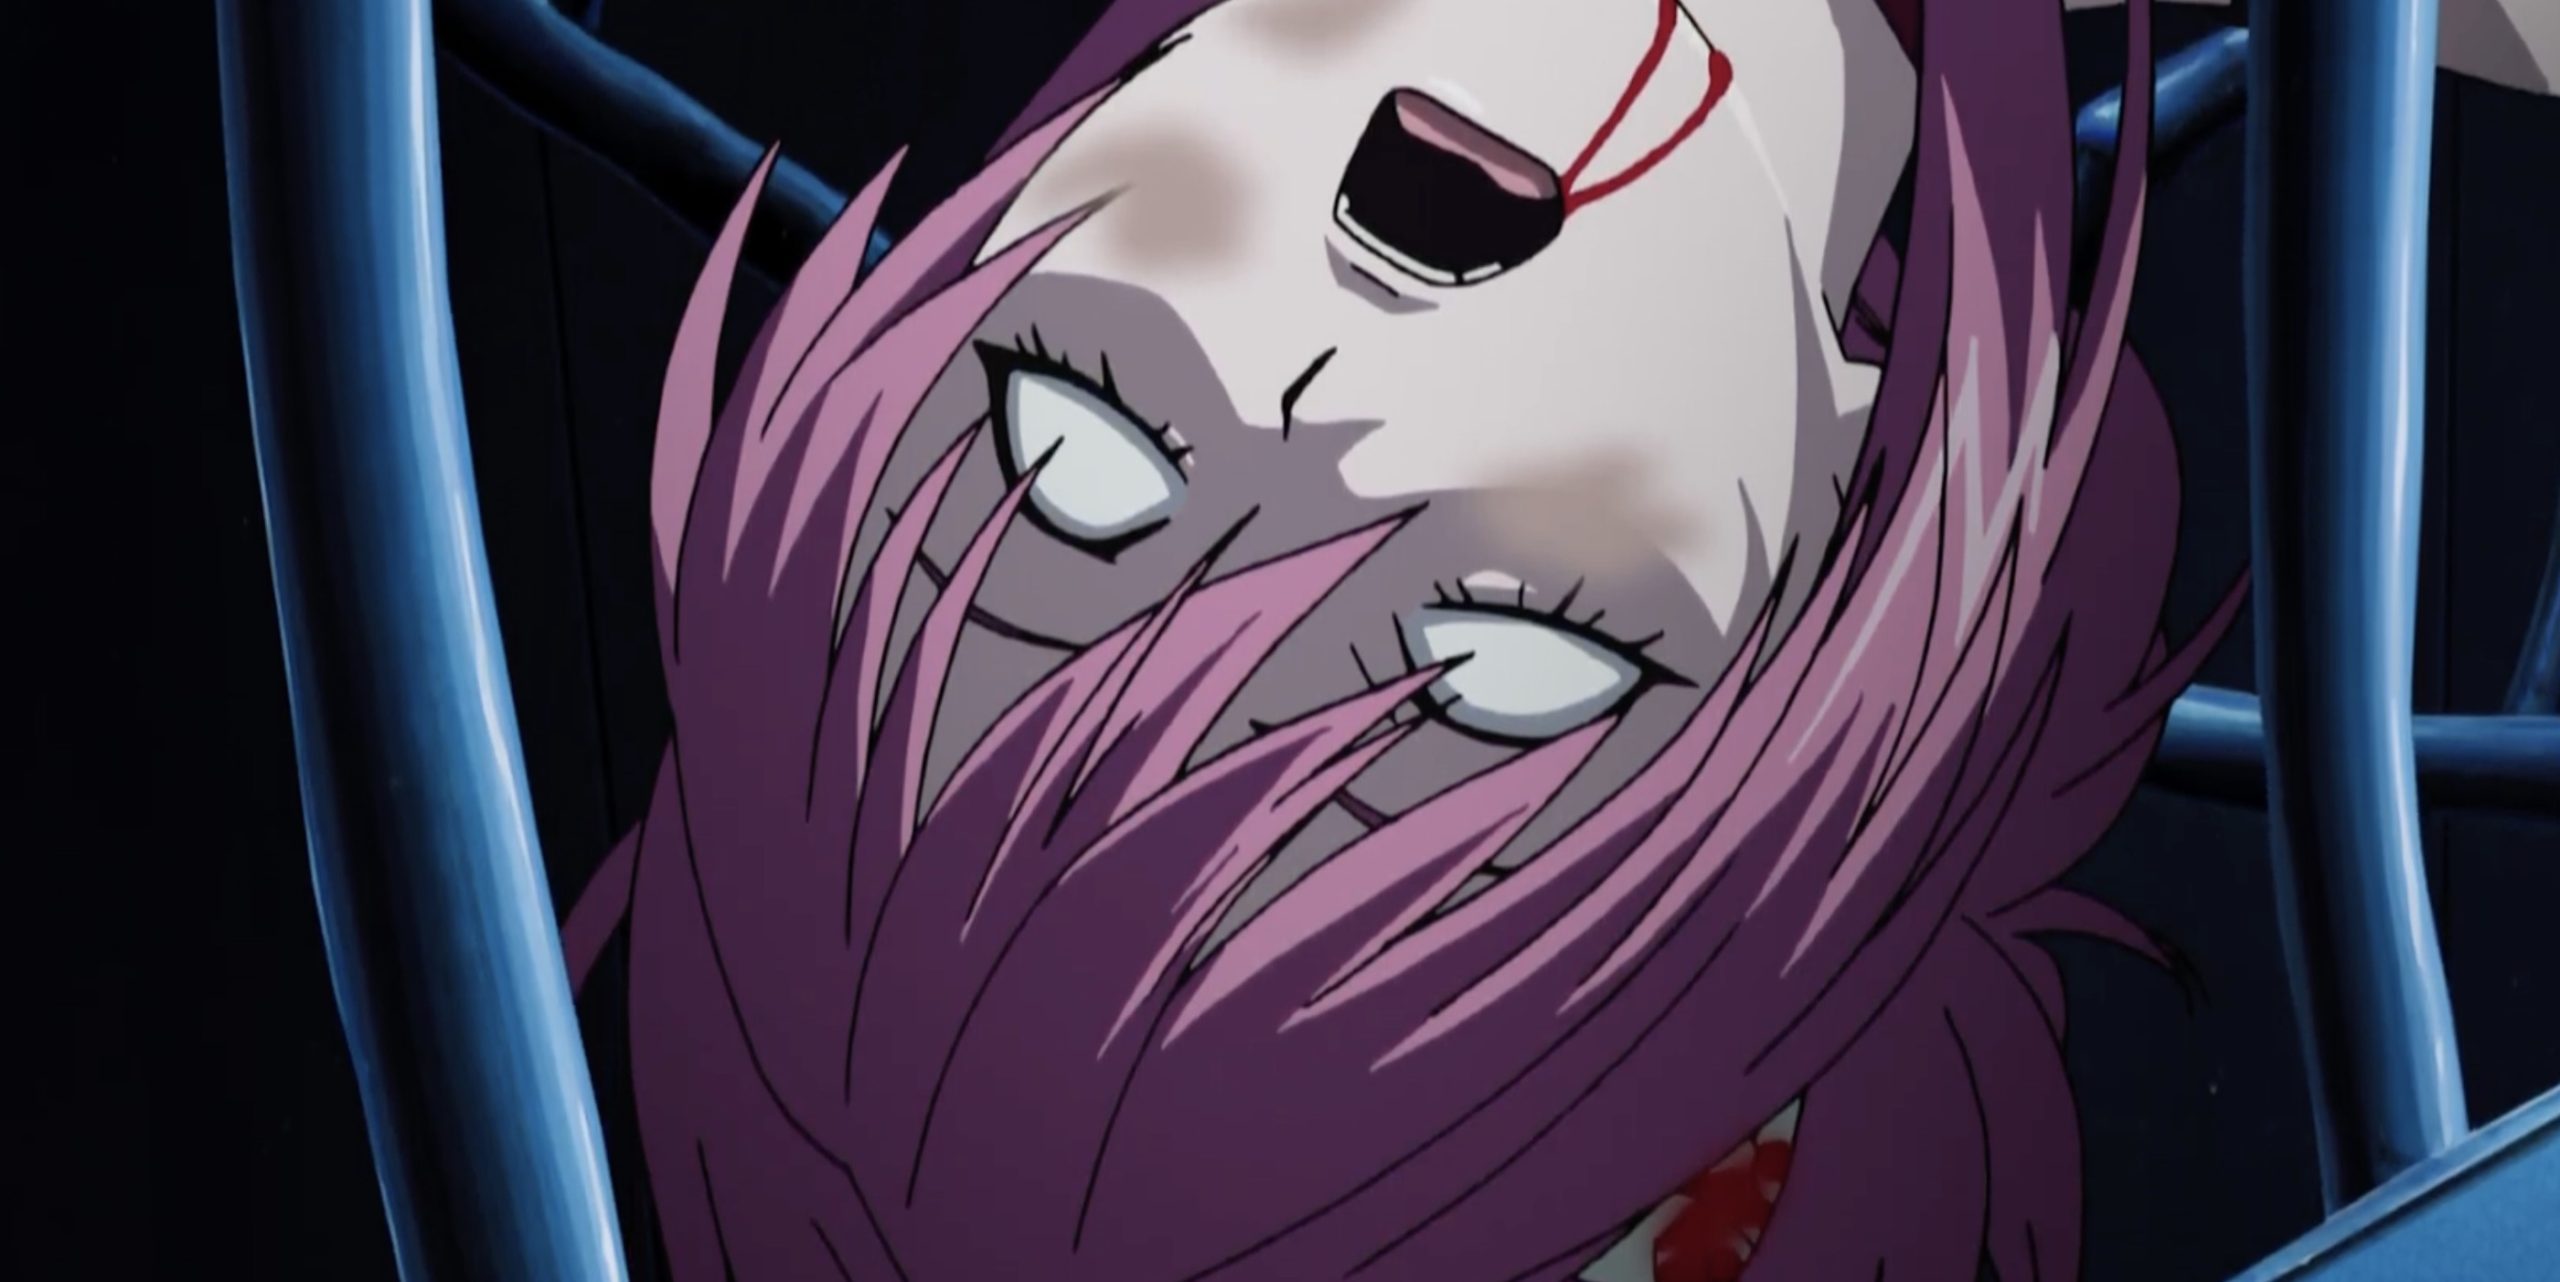 1707827671 970 The Real Reason Why Fans Hate The Elfen Lied Anime